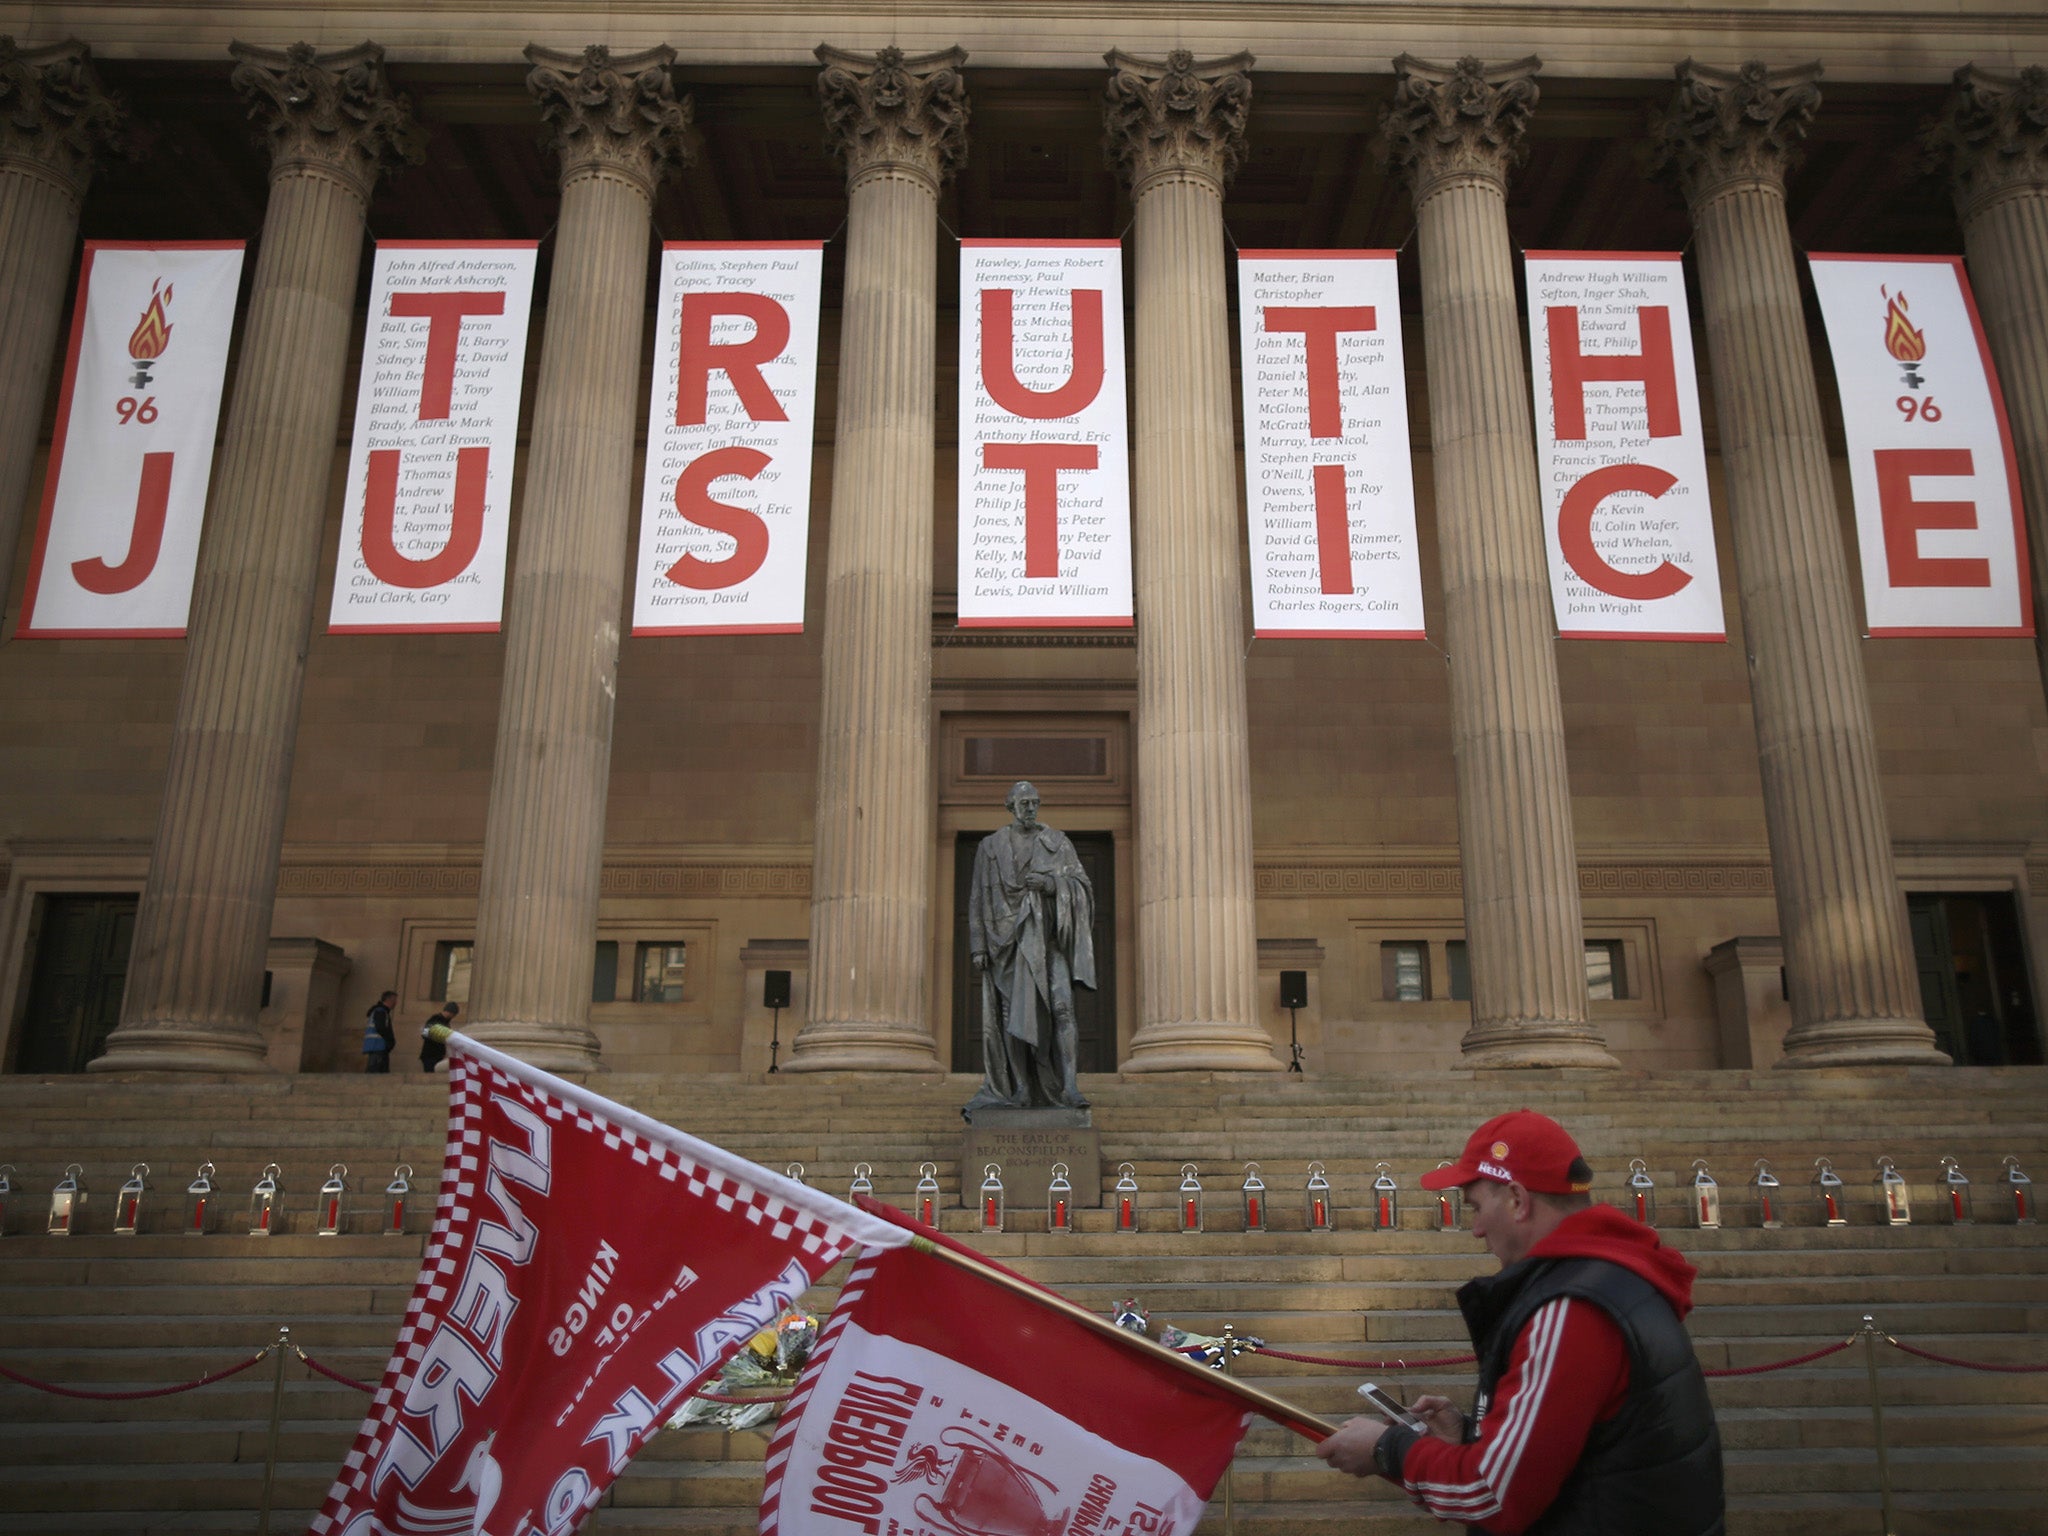 A banner hung from the Doric pillars of Saint George's Hall in the centre of Liverpool